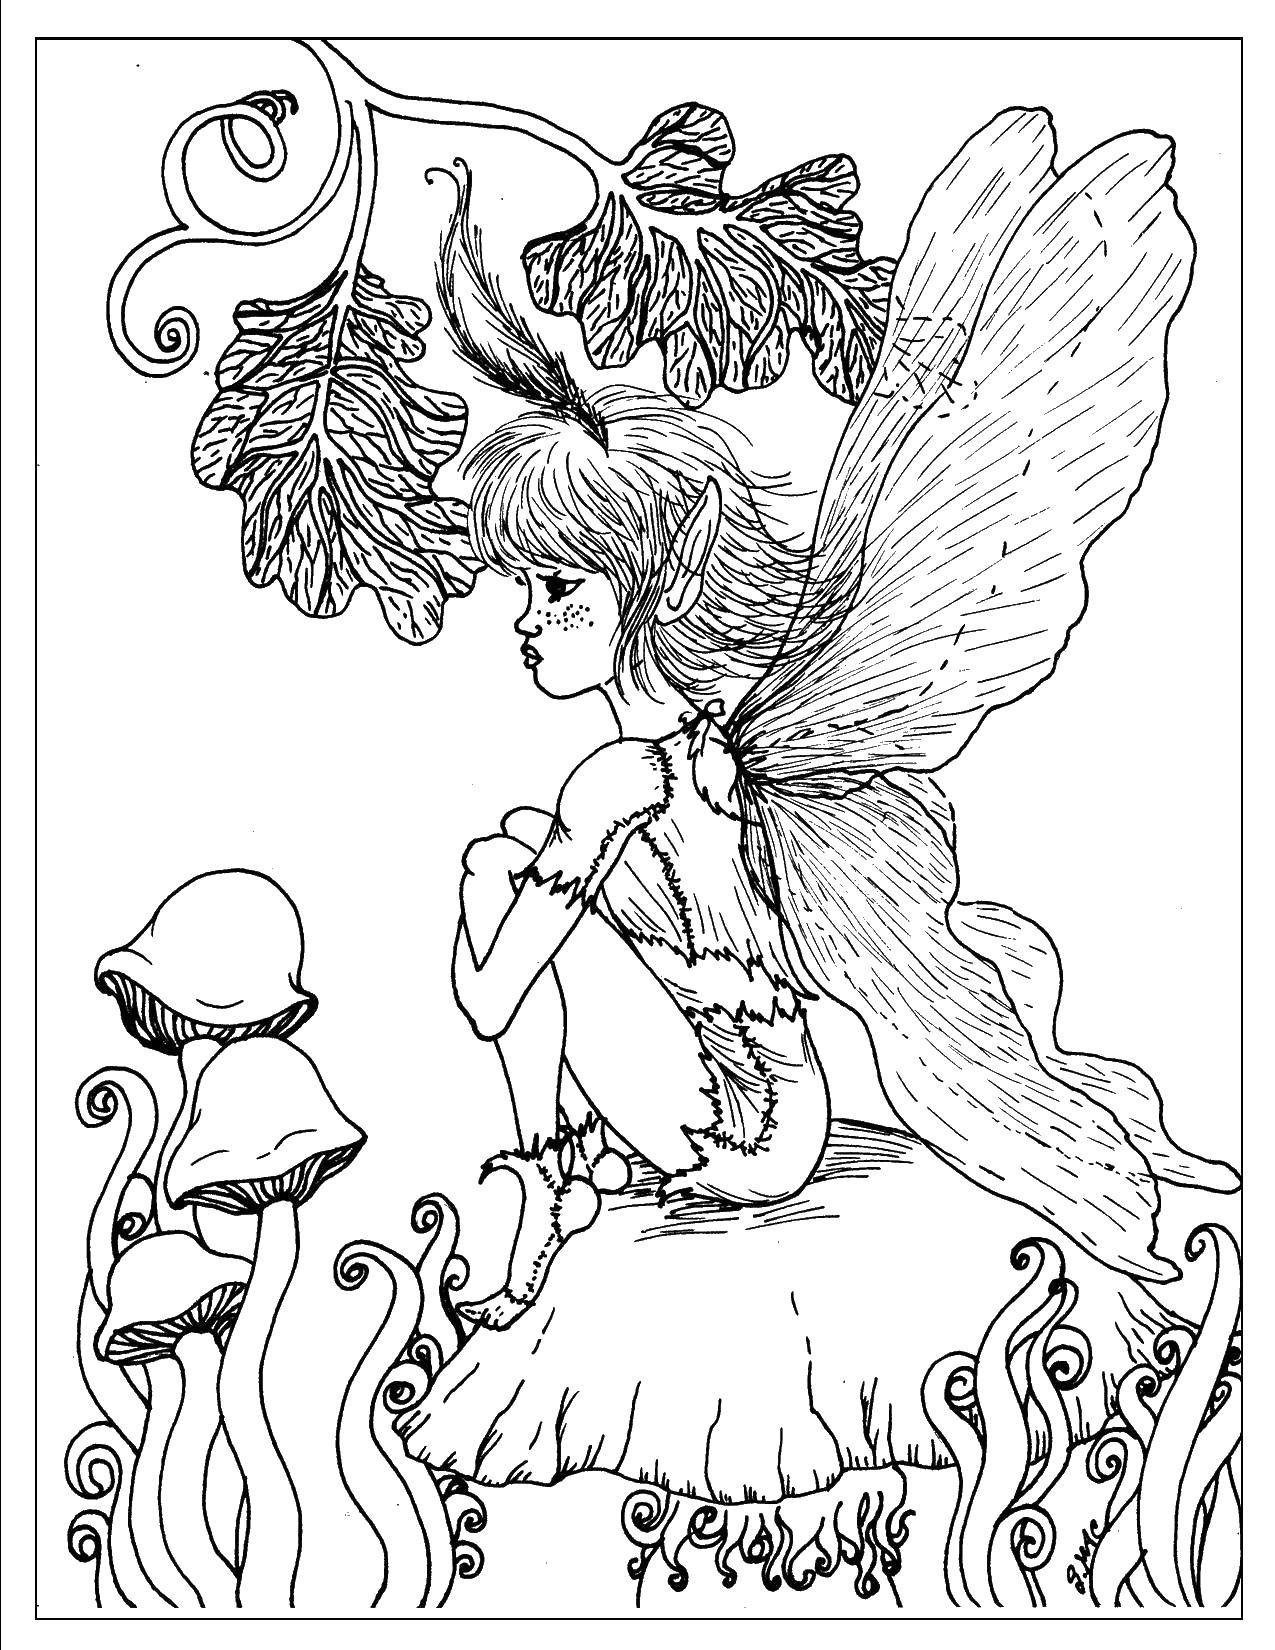 Coloring Fairy and mushrooms. Category fiction. Tags:  fairy, flowers, wings.